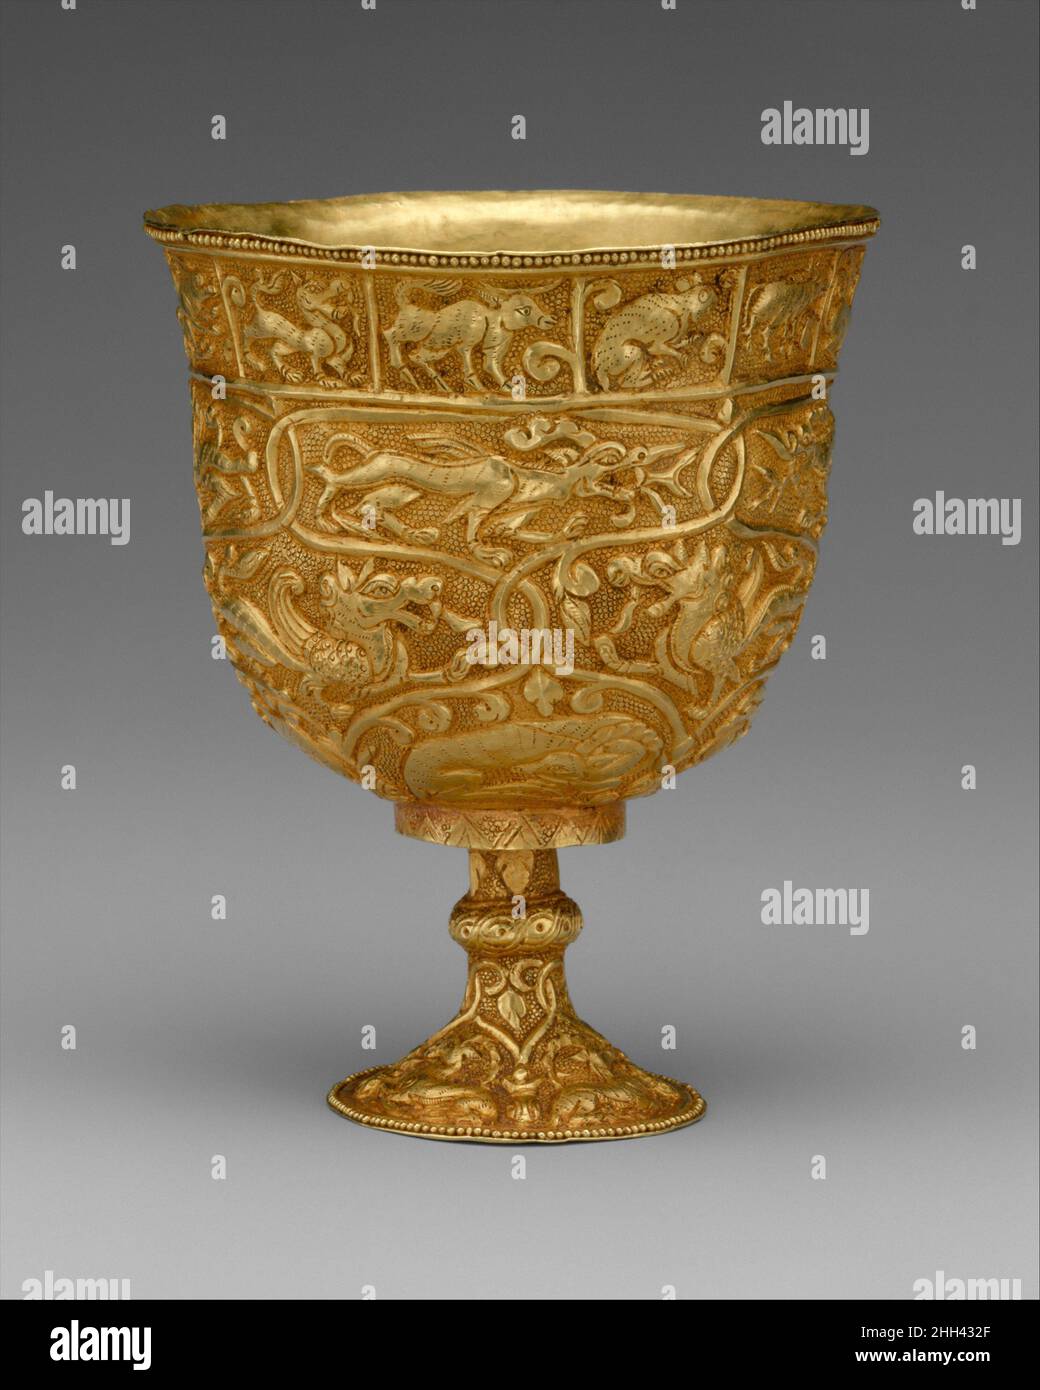 Stem Cup 7th–9th century China (Xinjiang Autonomous Region, Central Asia) The intertwined vine with its curled leaves is reminiscent of Sogdian imagery and motifs found in Gandharan Dionysian reliefs. The twelve animals of the Chinese zodiac are placed in rectangular frames beneath the cup rim.. Stem Cup. China (Xinjiang Autonomous Region, Central Asia). 7th–9th century. Gold with repoussé decoration. Period of Tibetan Empire. Metalwork Stock Photo